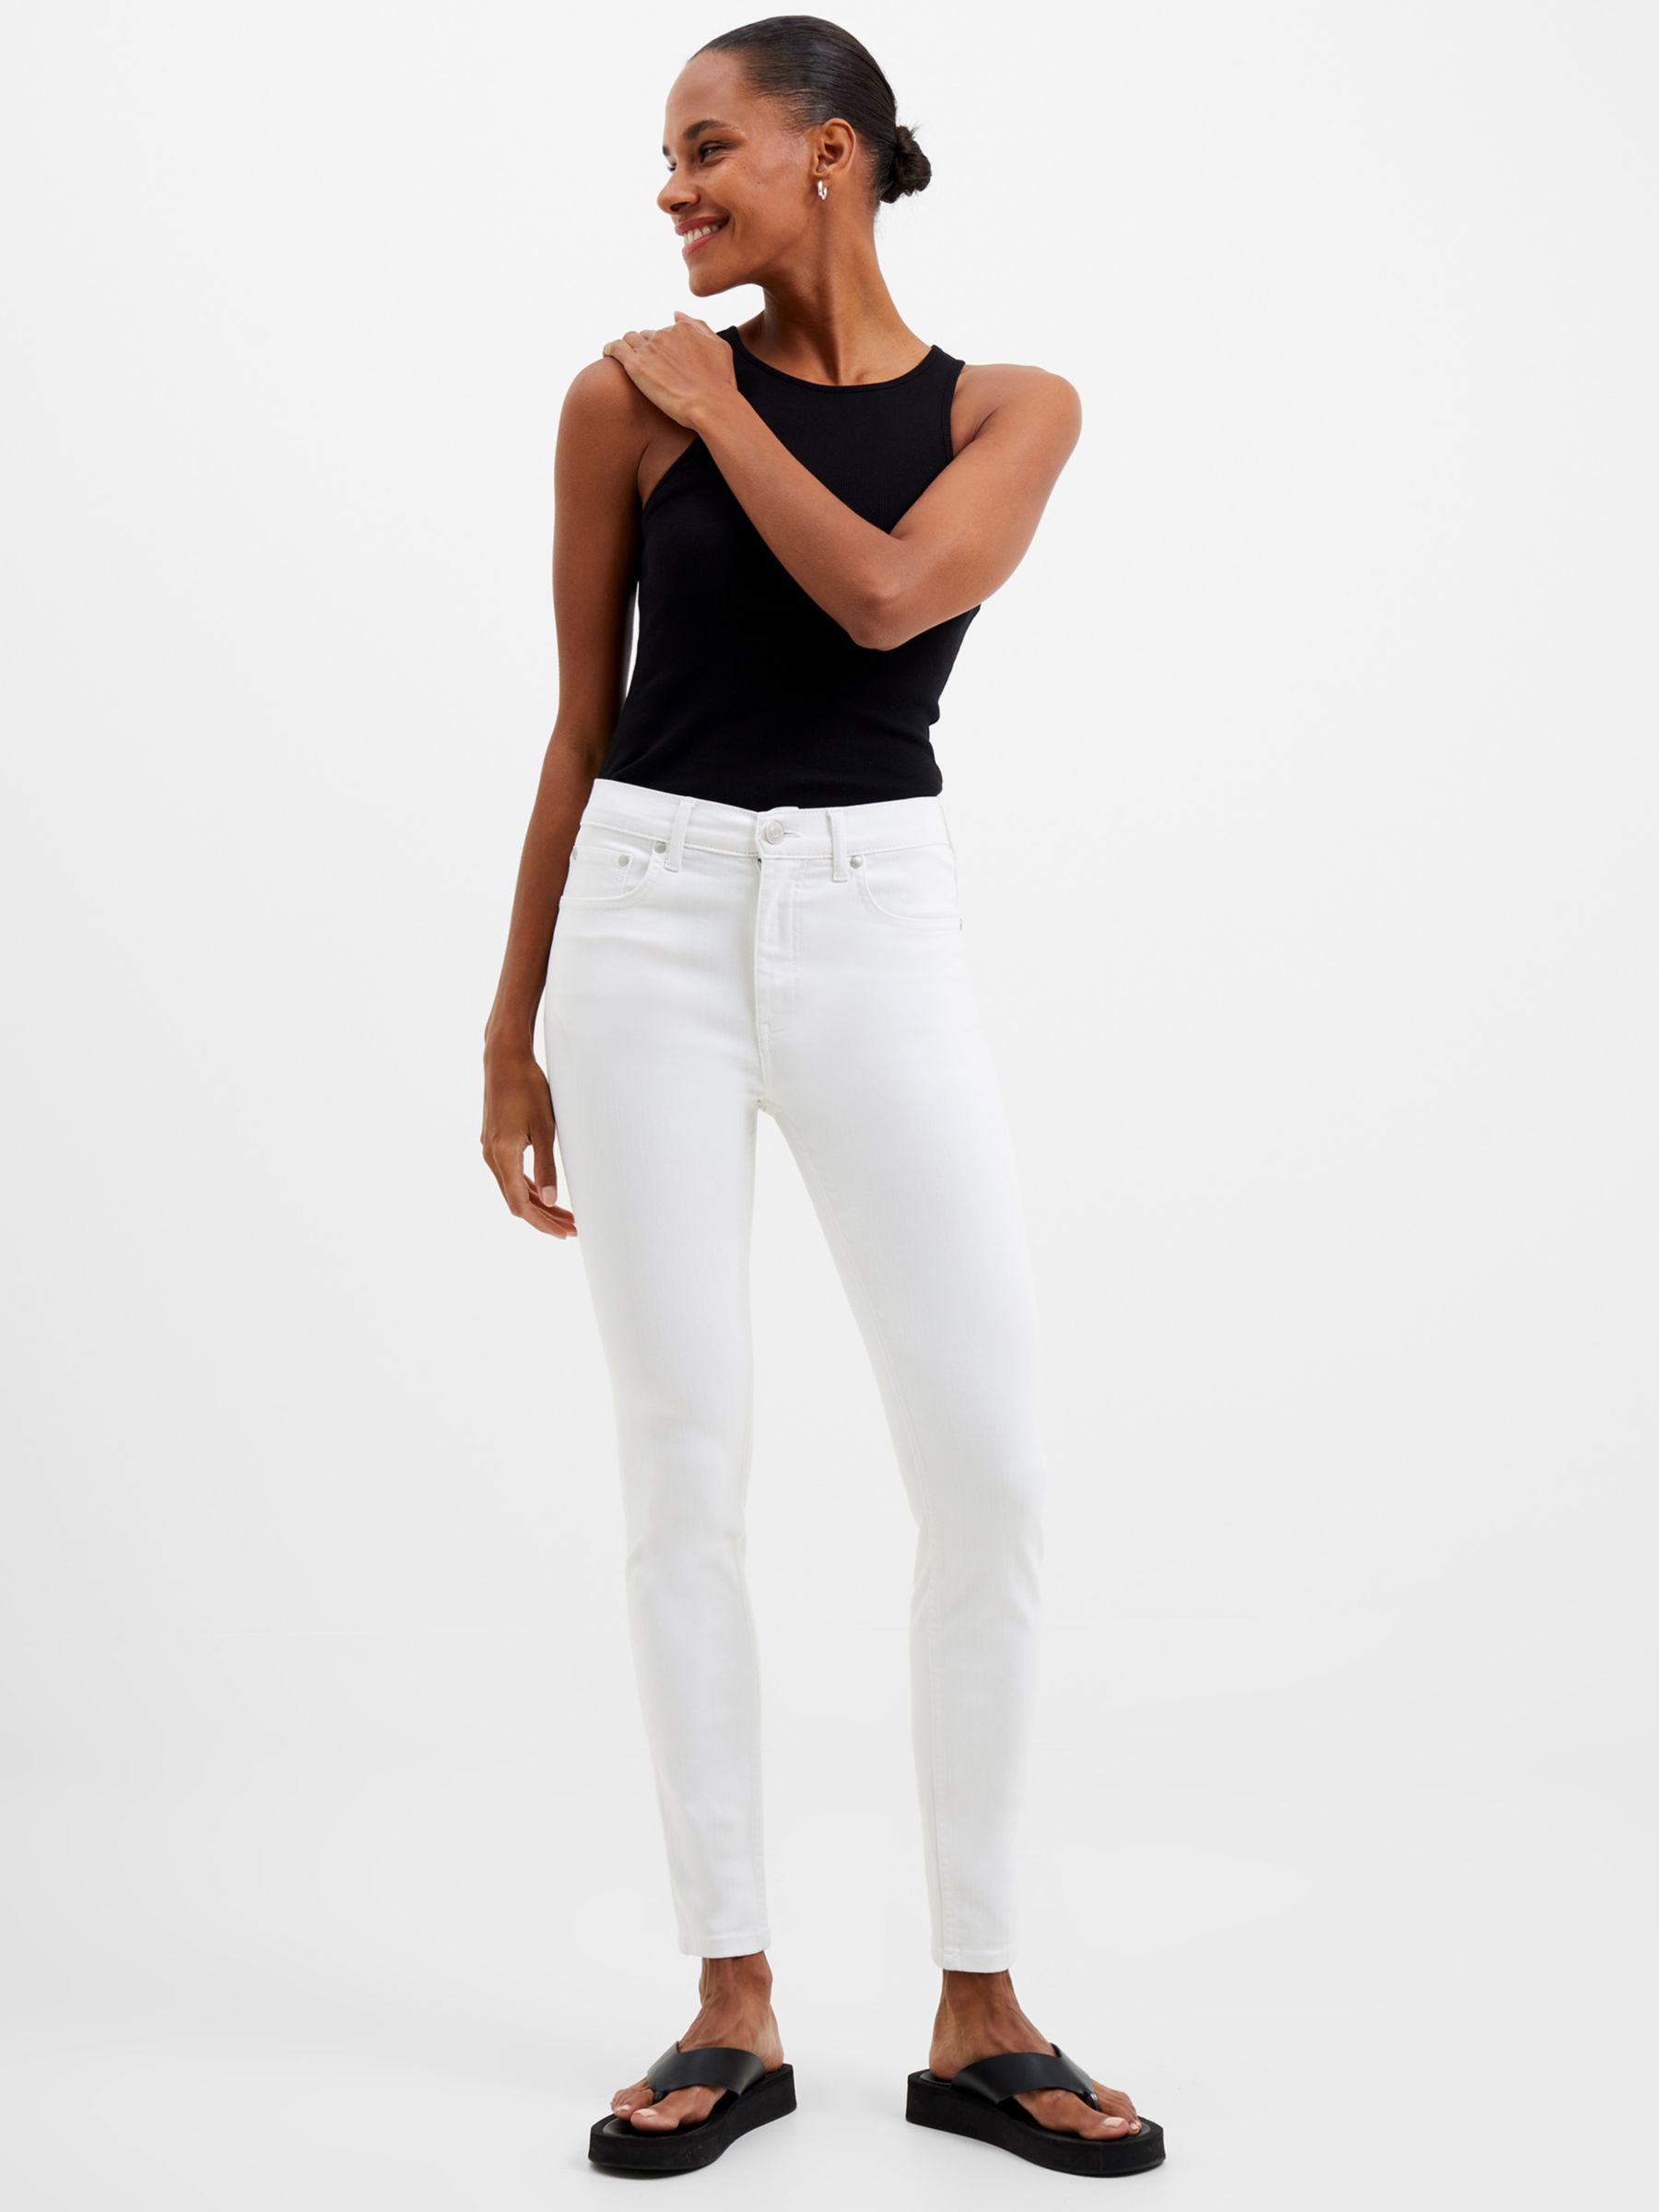 French Connection Rebound Skinny Jeans, White, 10